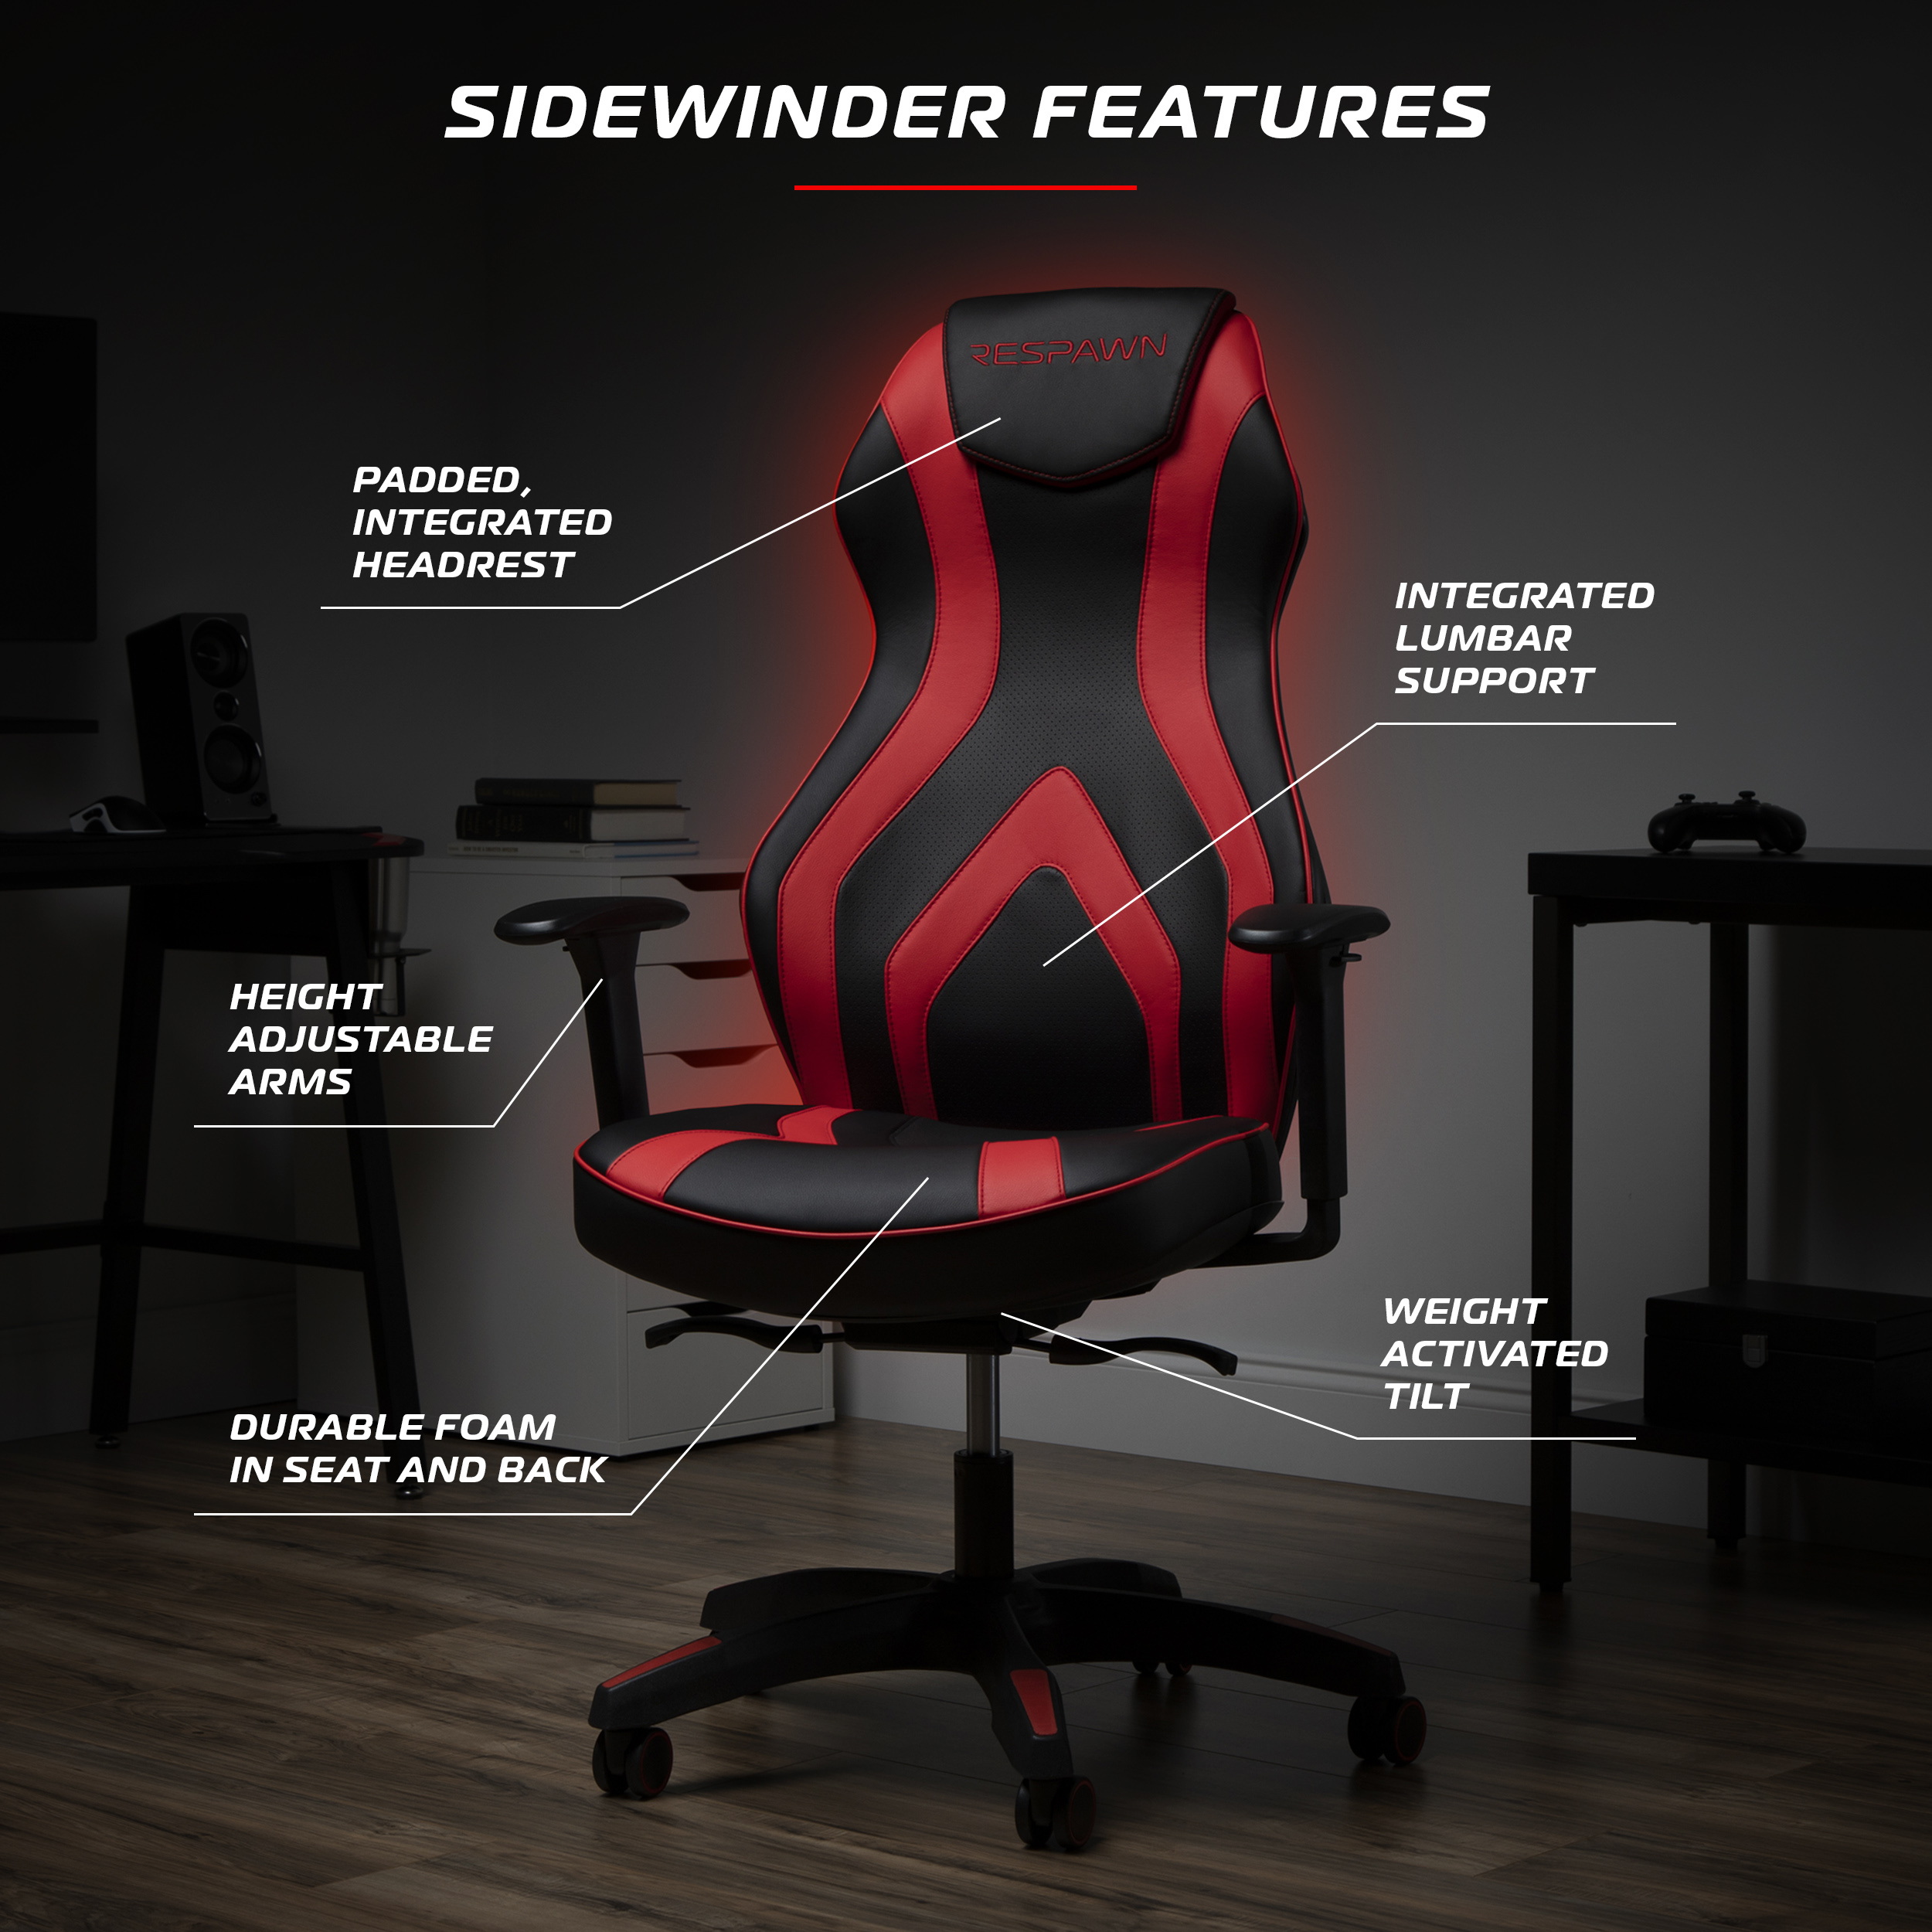 RESPAWN Sidewinder Gaming Chair, PU Leather, in Rage Red (RSP-125-RED) - image 2 of 17